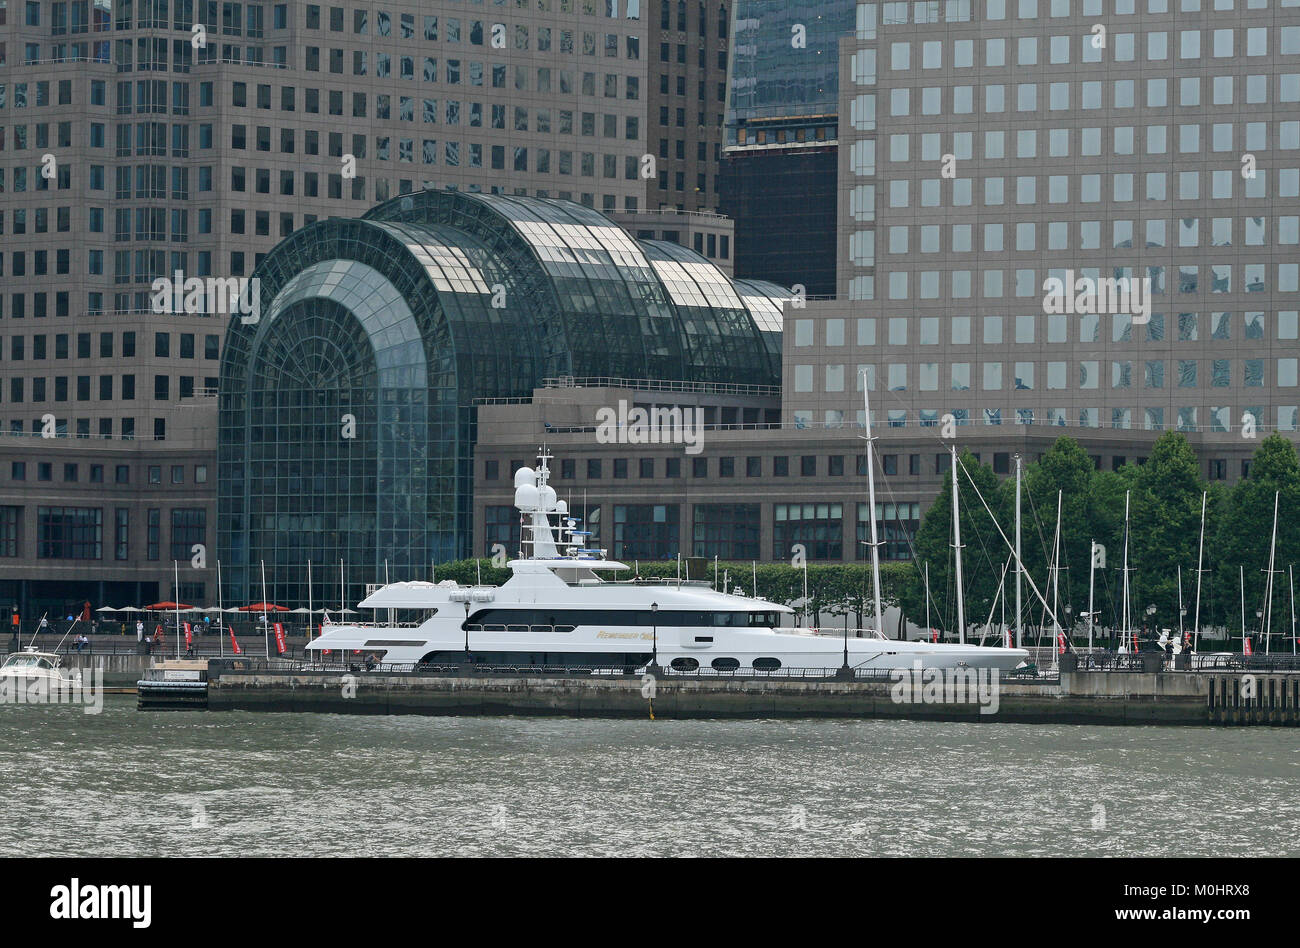 The Winter Garden Atrium on Vesey Street in New York City's Brookfield Place office complex, Lower Manhattan, seen from the Hudson River, New York Cit Stock Photo